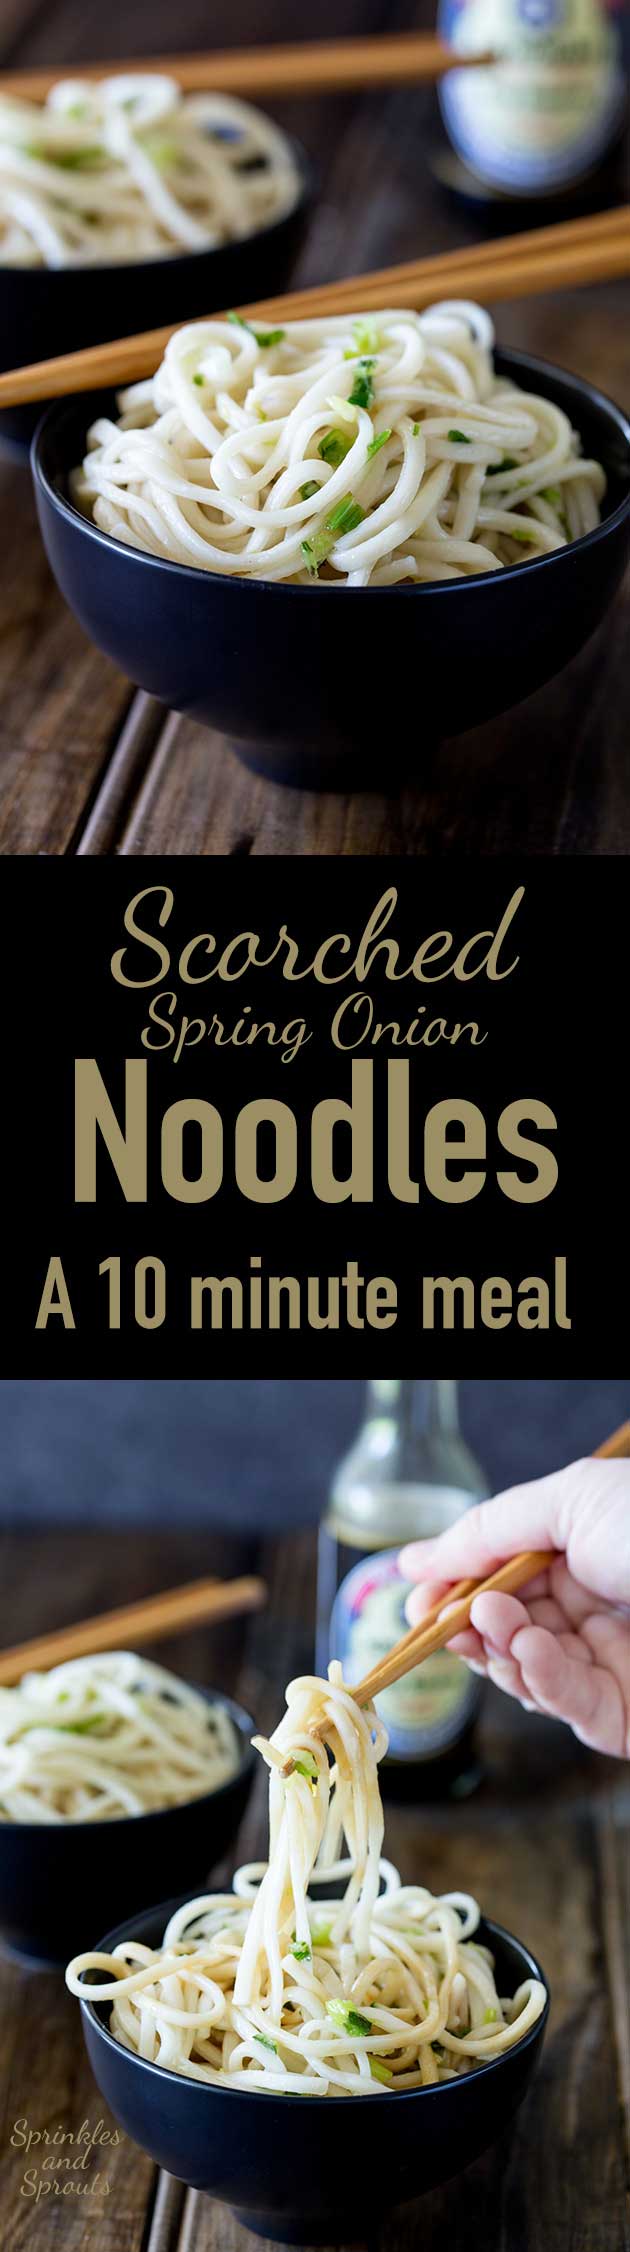 pin image of scorched spring onion noddles